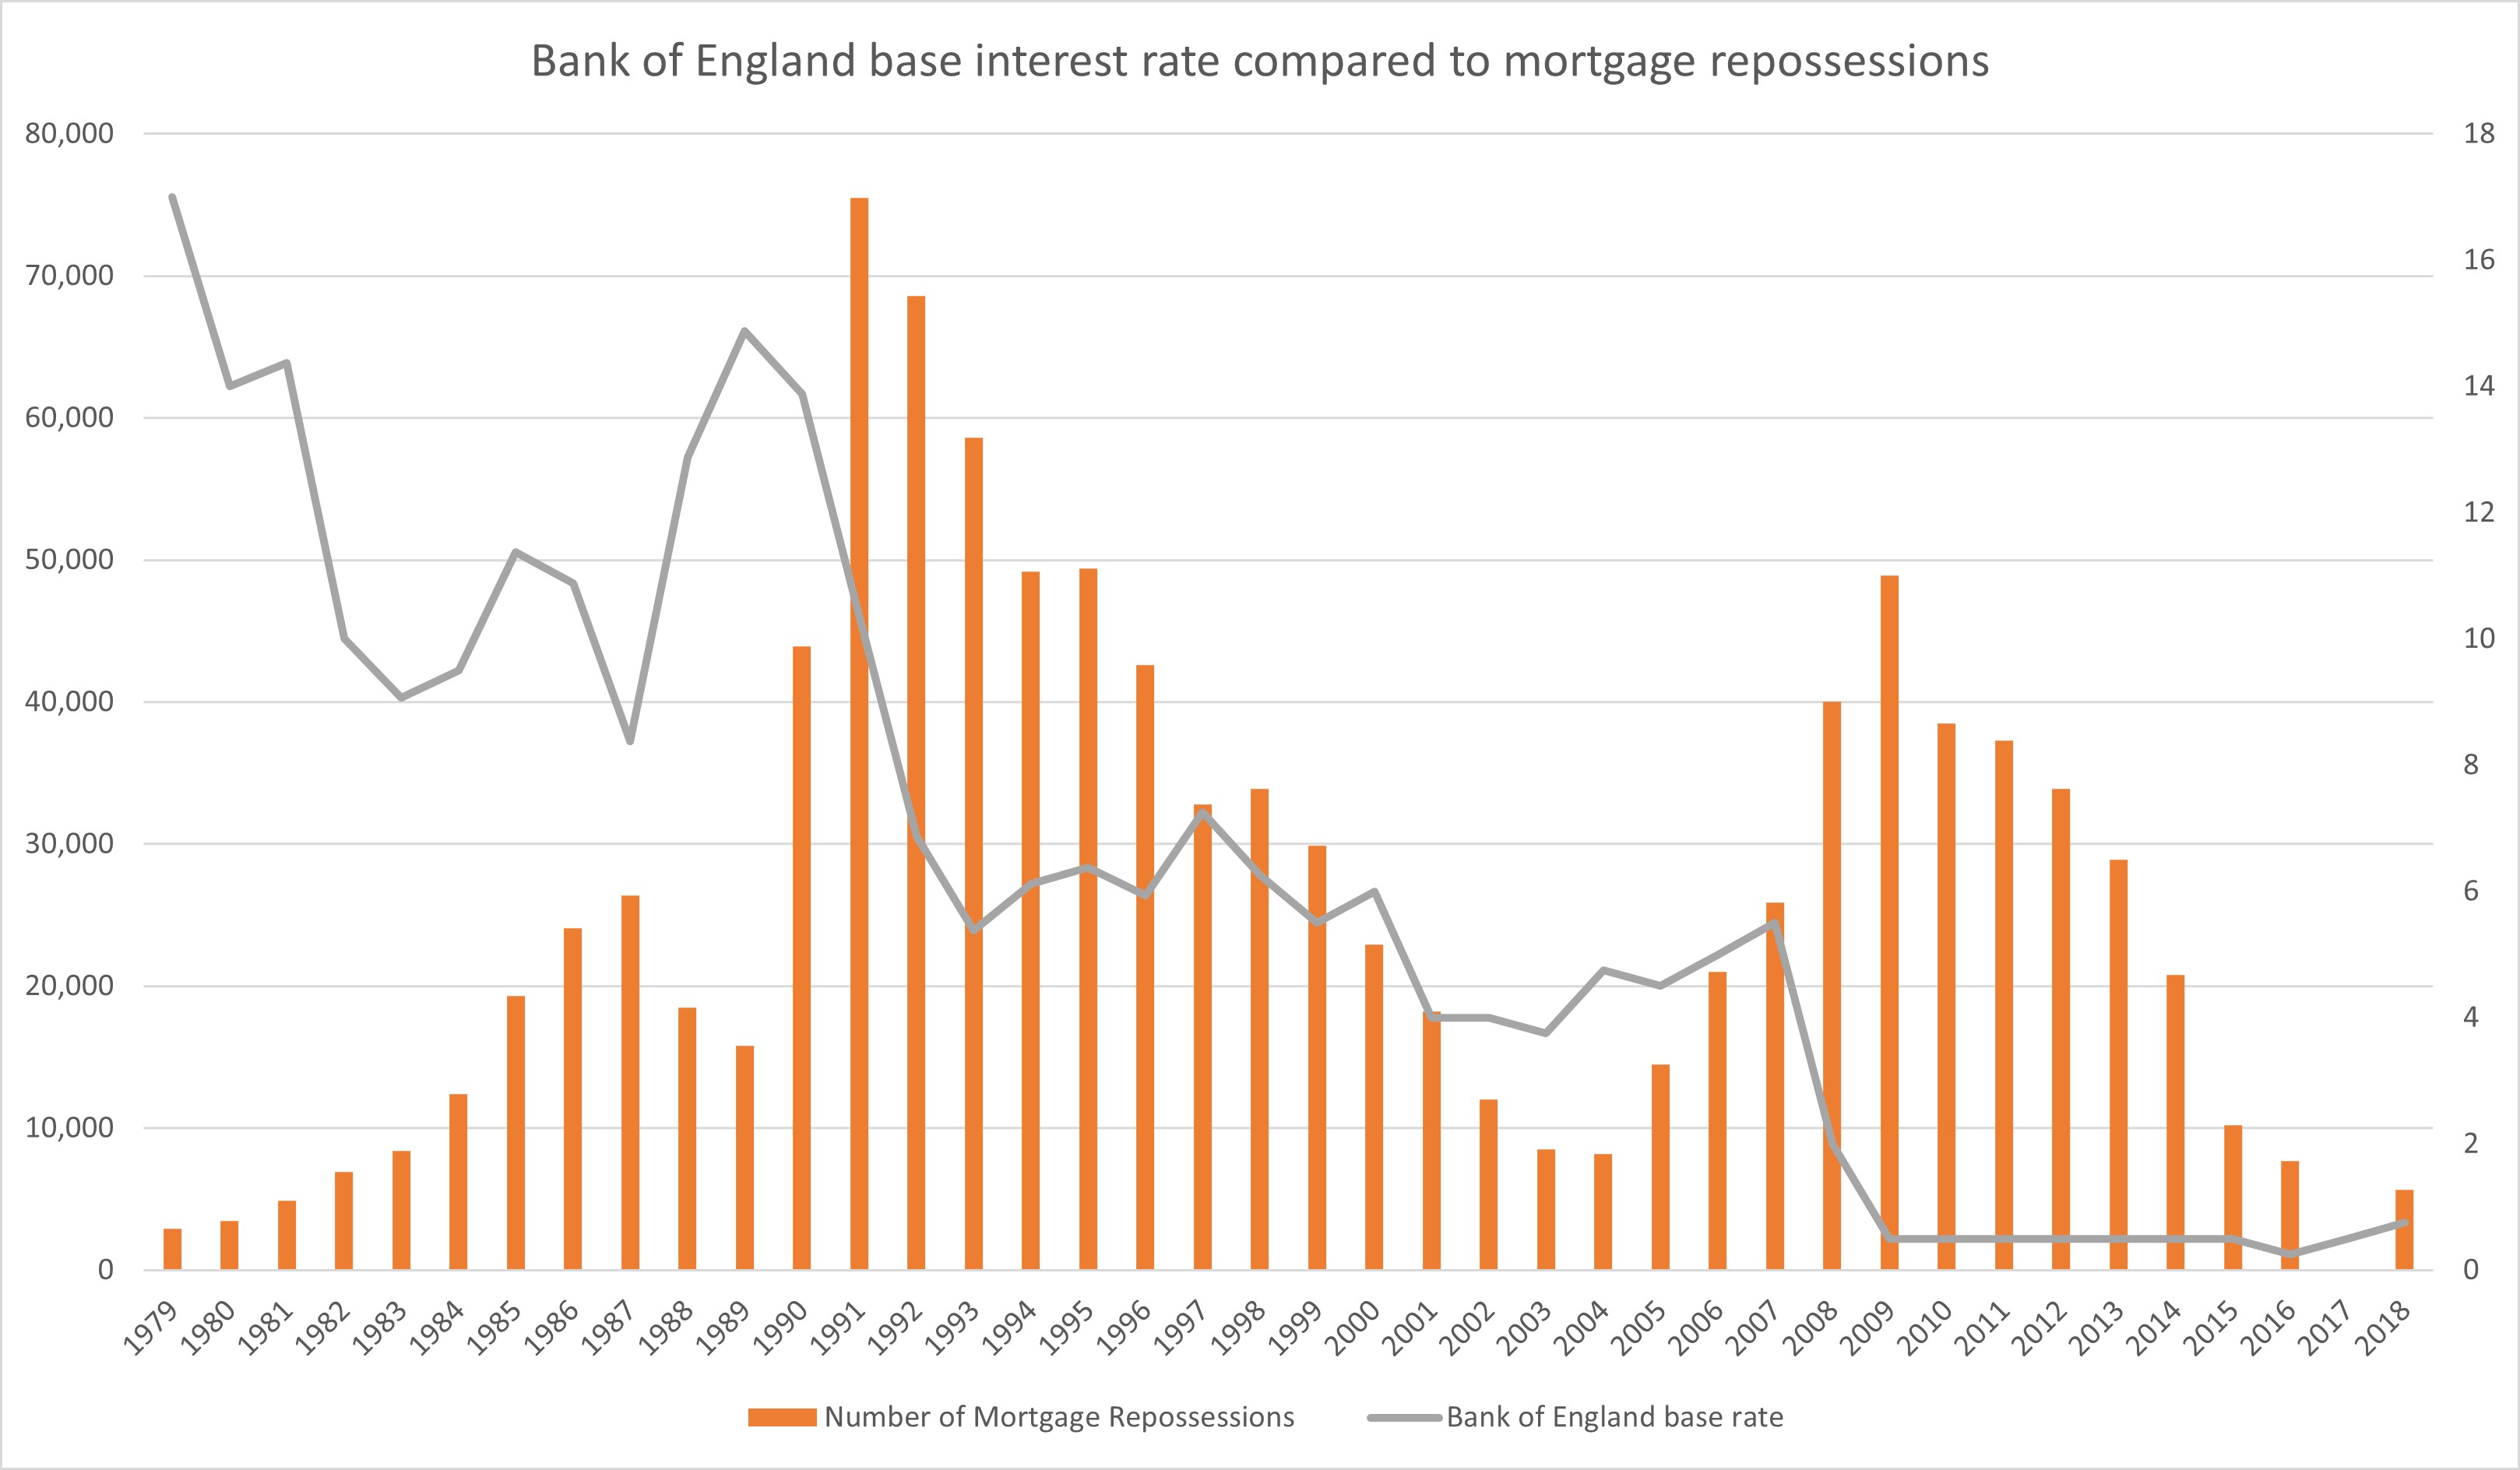 BoE base rate interest rate compared to mortgage repossessions